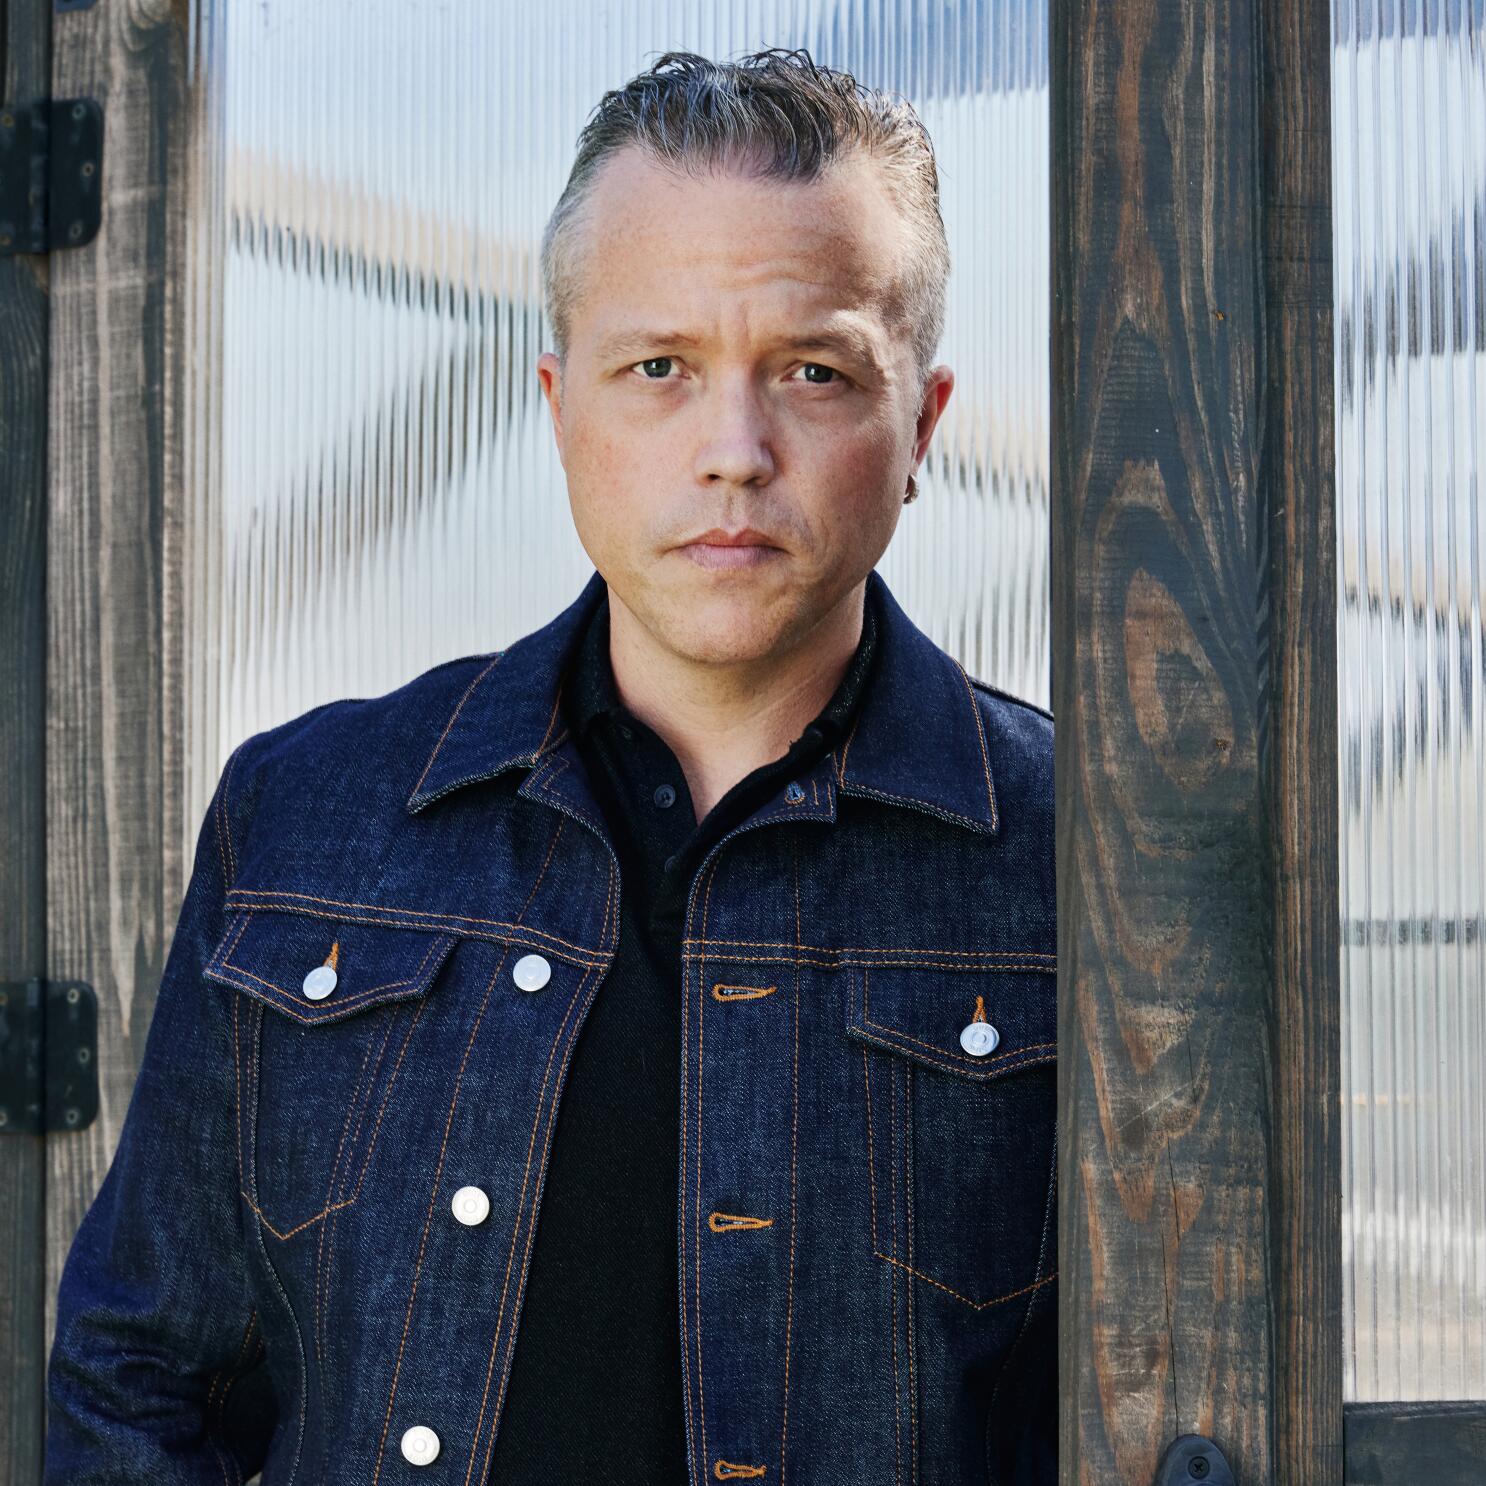 Jason Isbell On 'Reunions,' Staying Sober, And The Challenge Of Good  Songwriting : NPR